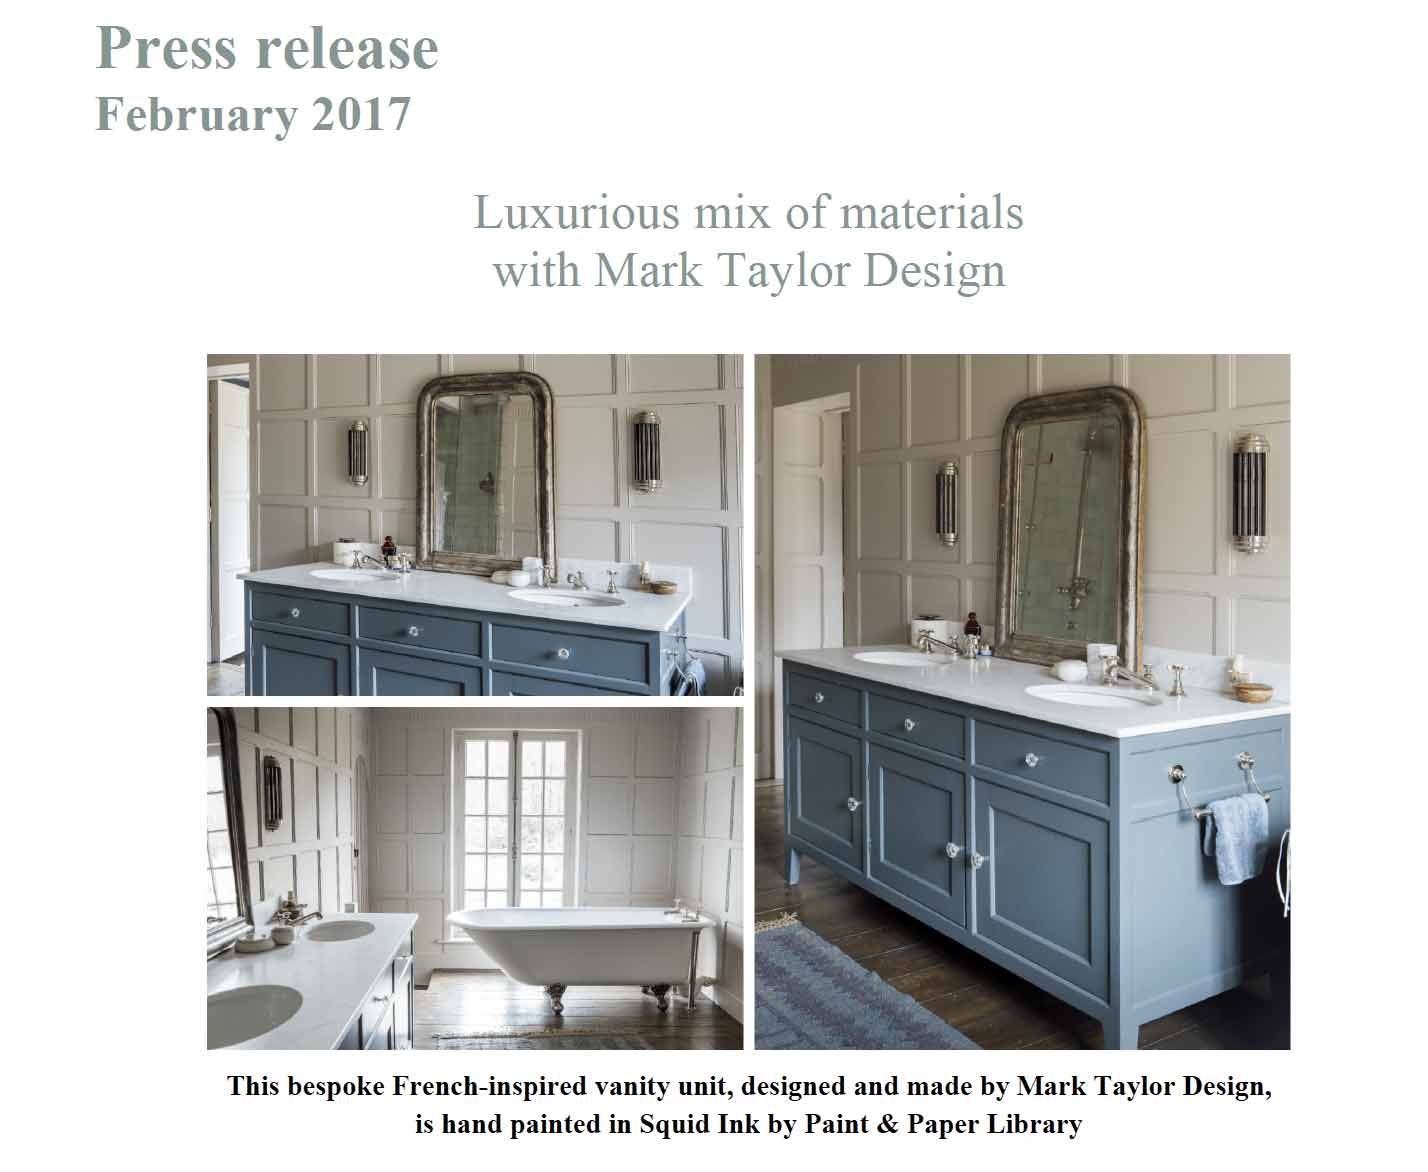 Bespoke  French – inspired vanity unit, designed and made by Mark Taylor Design